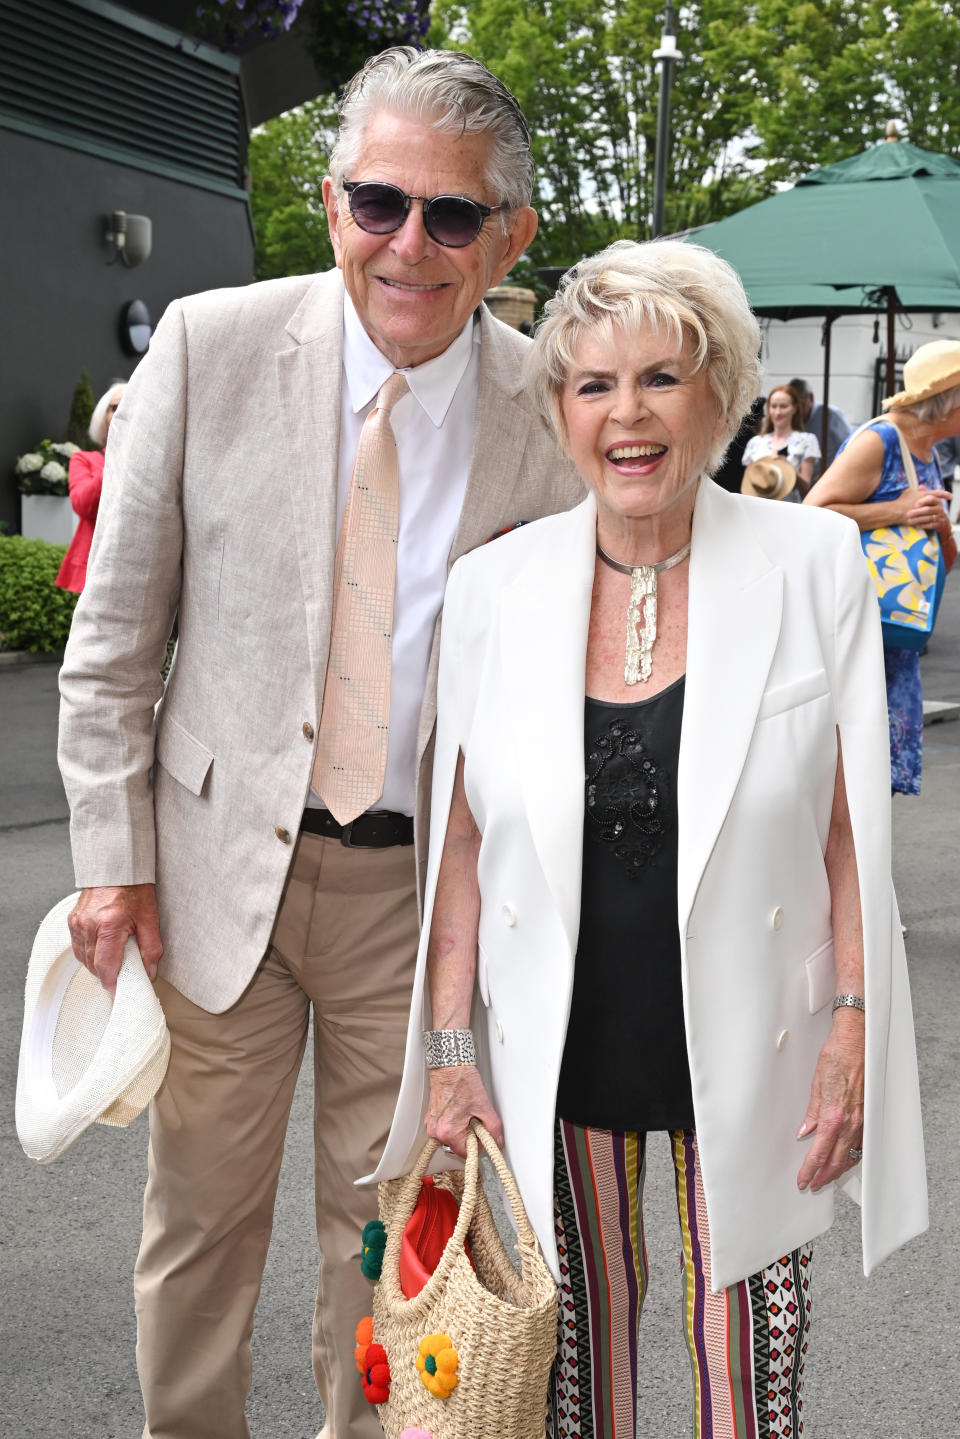 Stephen Way and Gloria Hunniford attend the All England Lawn Tennis and Croquet Club on July 09, 2022 in London, England. (Photo by Karwai Tang/WireImage)